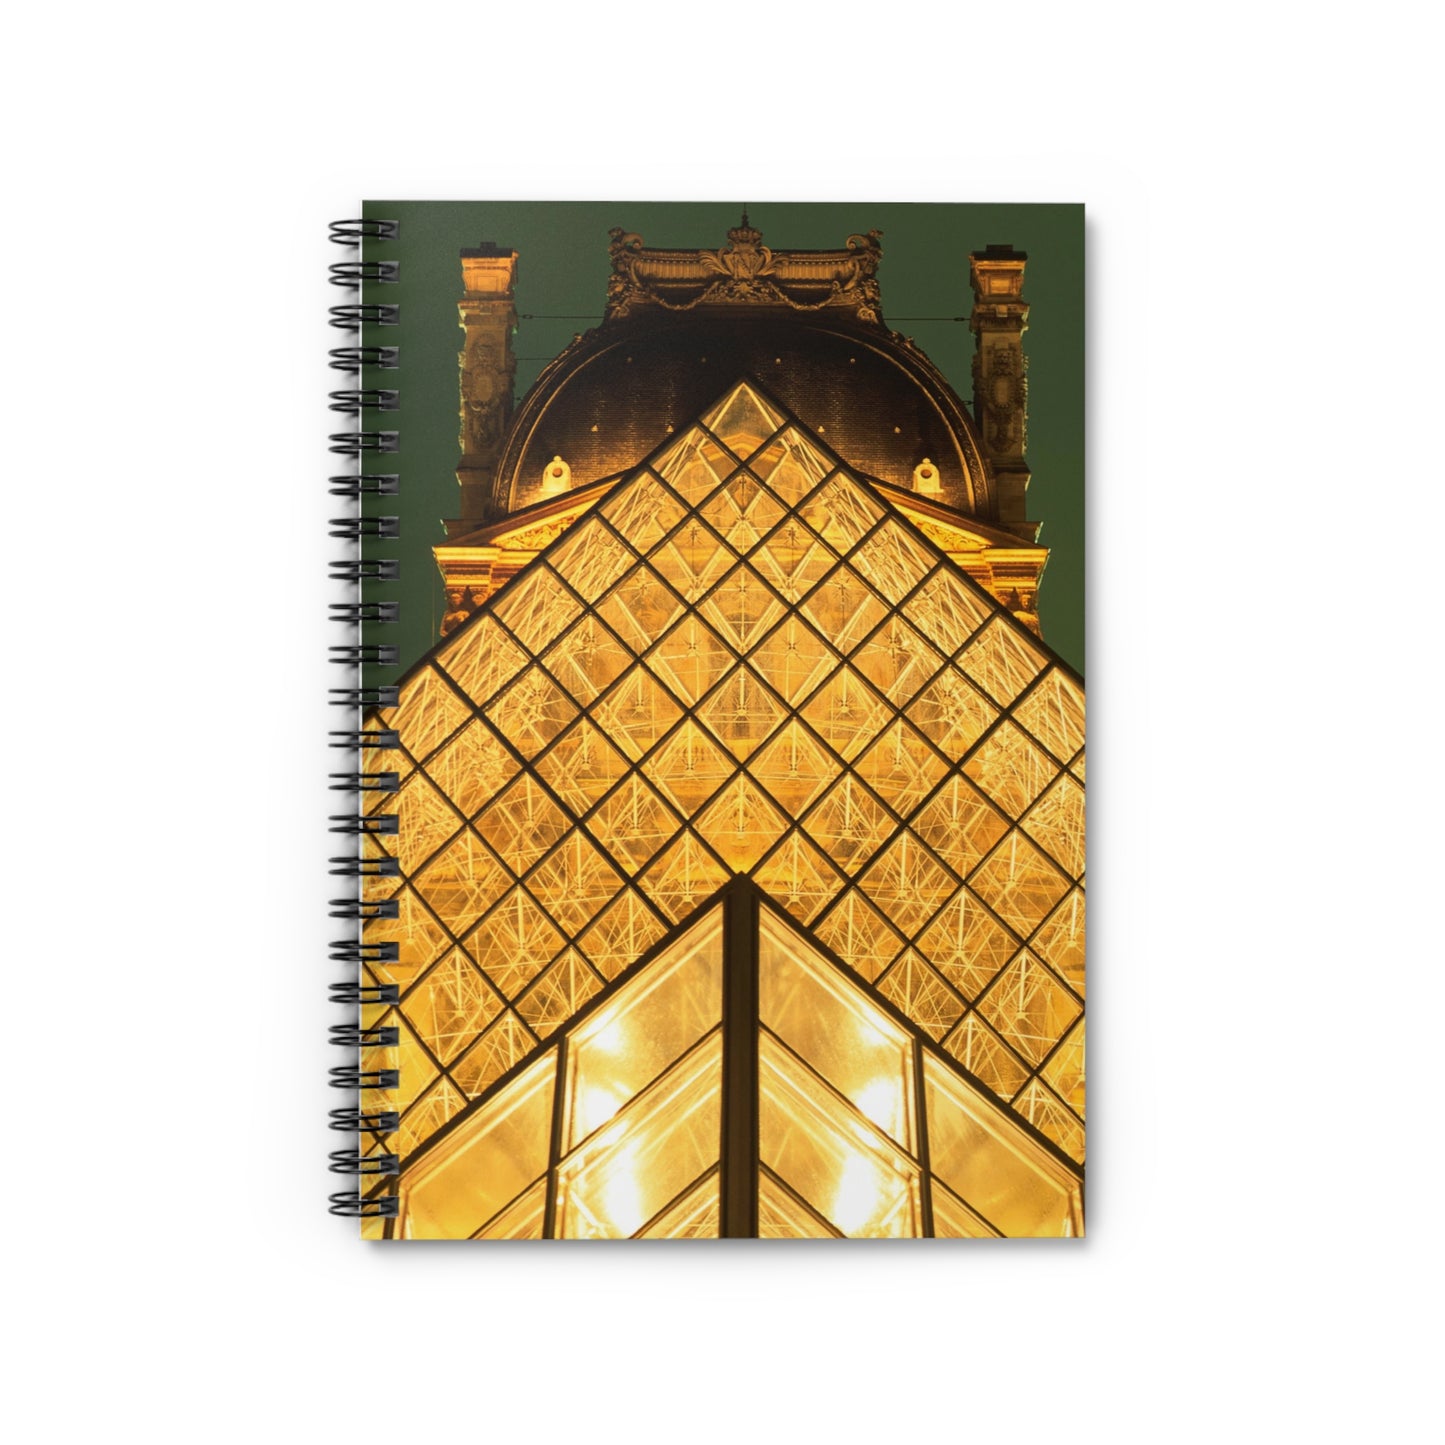 Louvre Spiral Notebook - Ruled Line